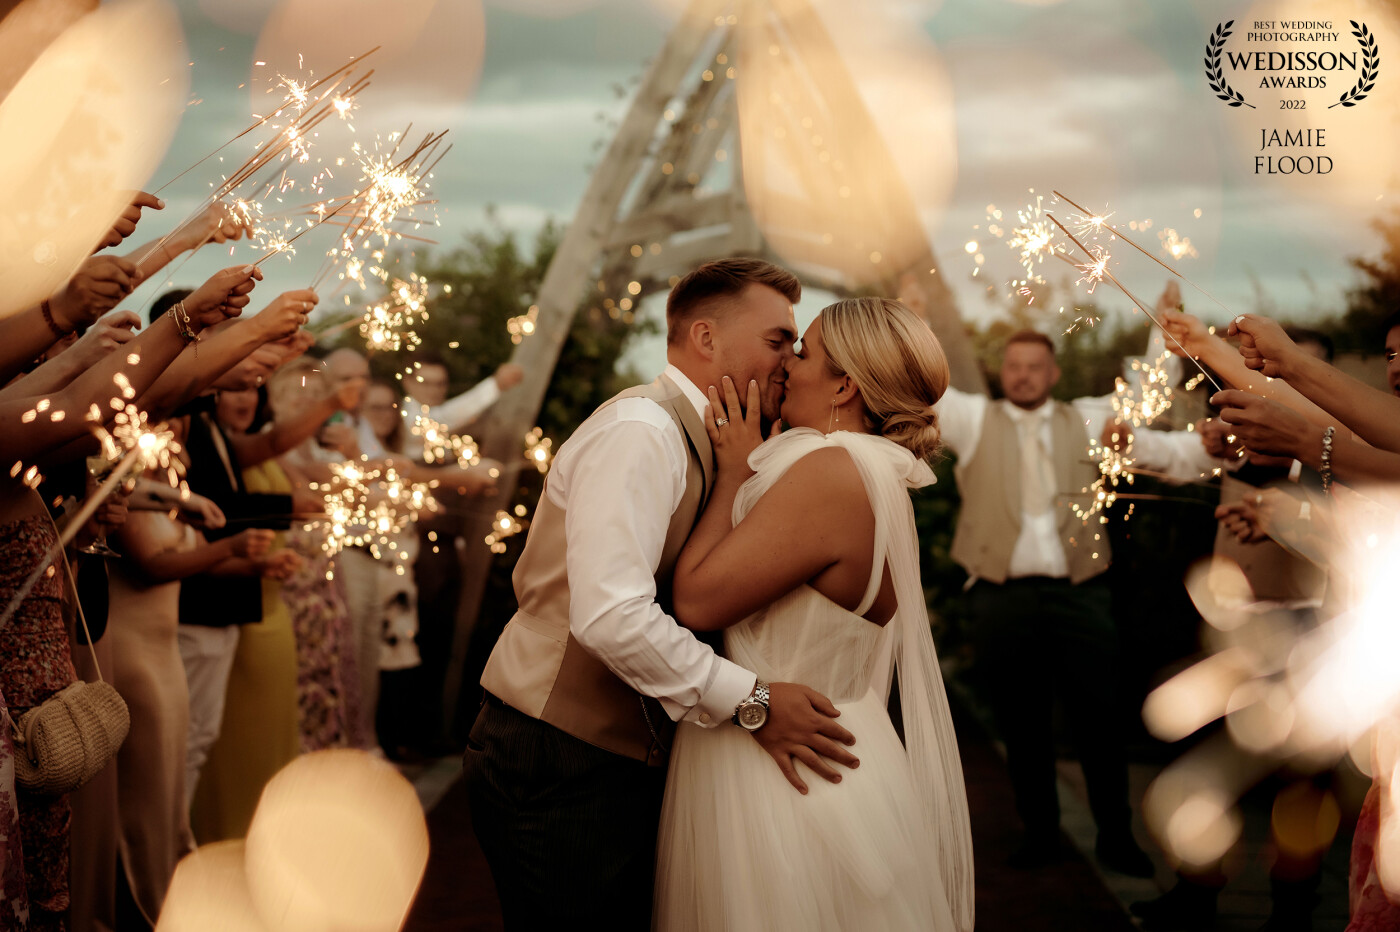 The Prices enjoying a kiss during their sparkler exit. Sparkler exits are always a favourite of mine to end my day at a wedding. They had a beautiful day full of both smiles and tears!